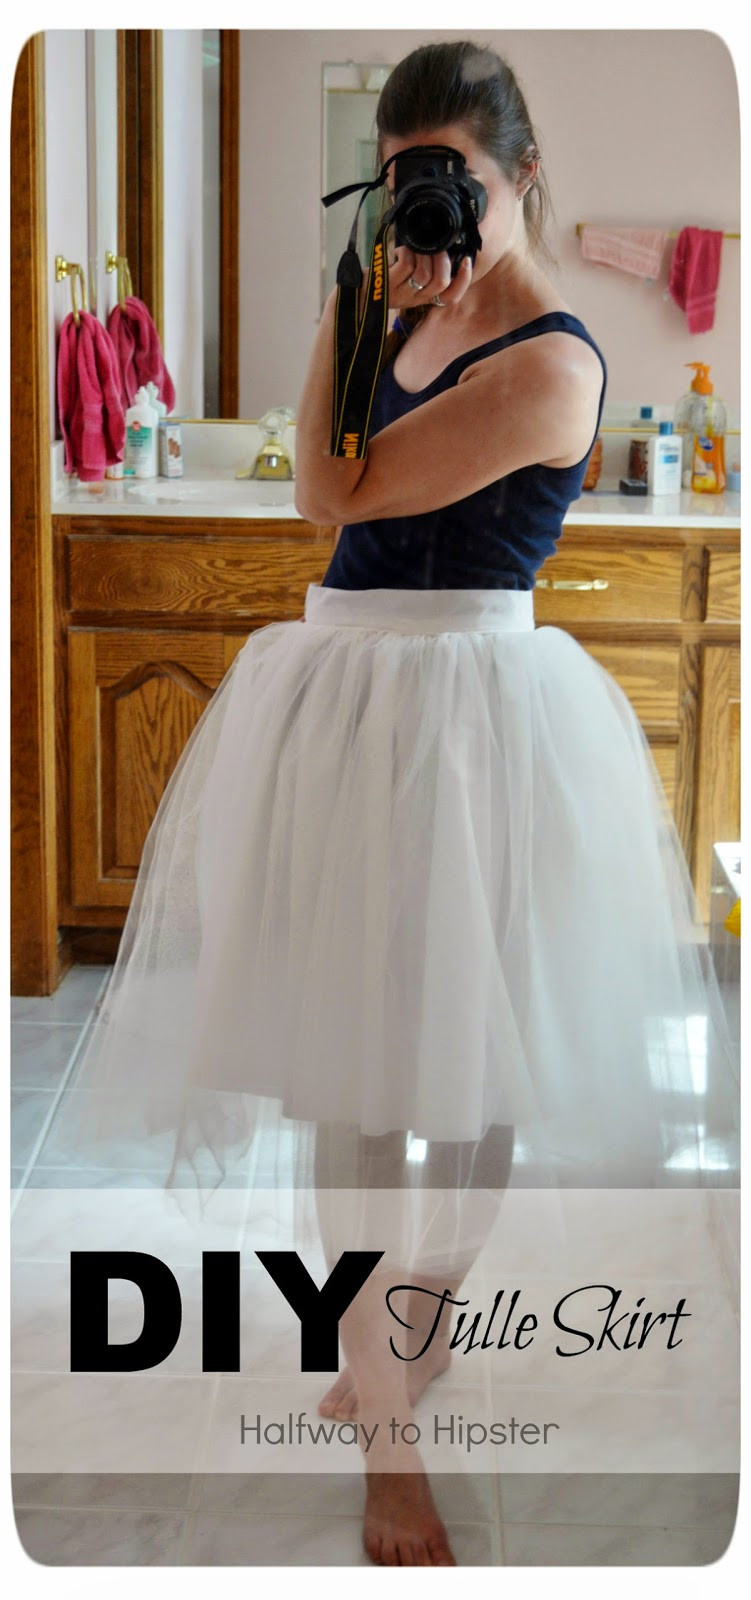 Tulle Skirts For Adults DIY
 Halfway To Hipster DIY Tulle Skirt